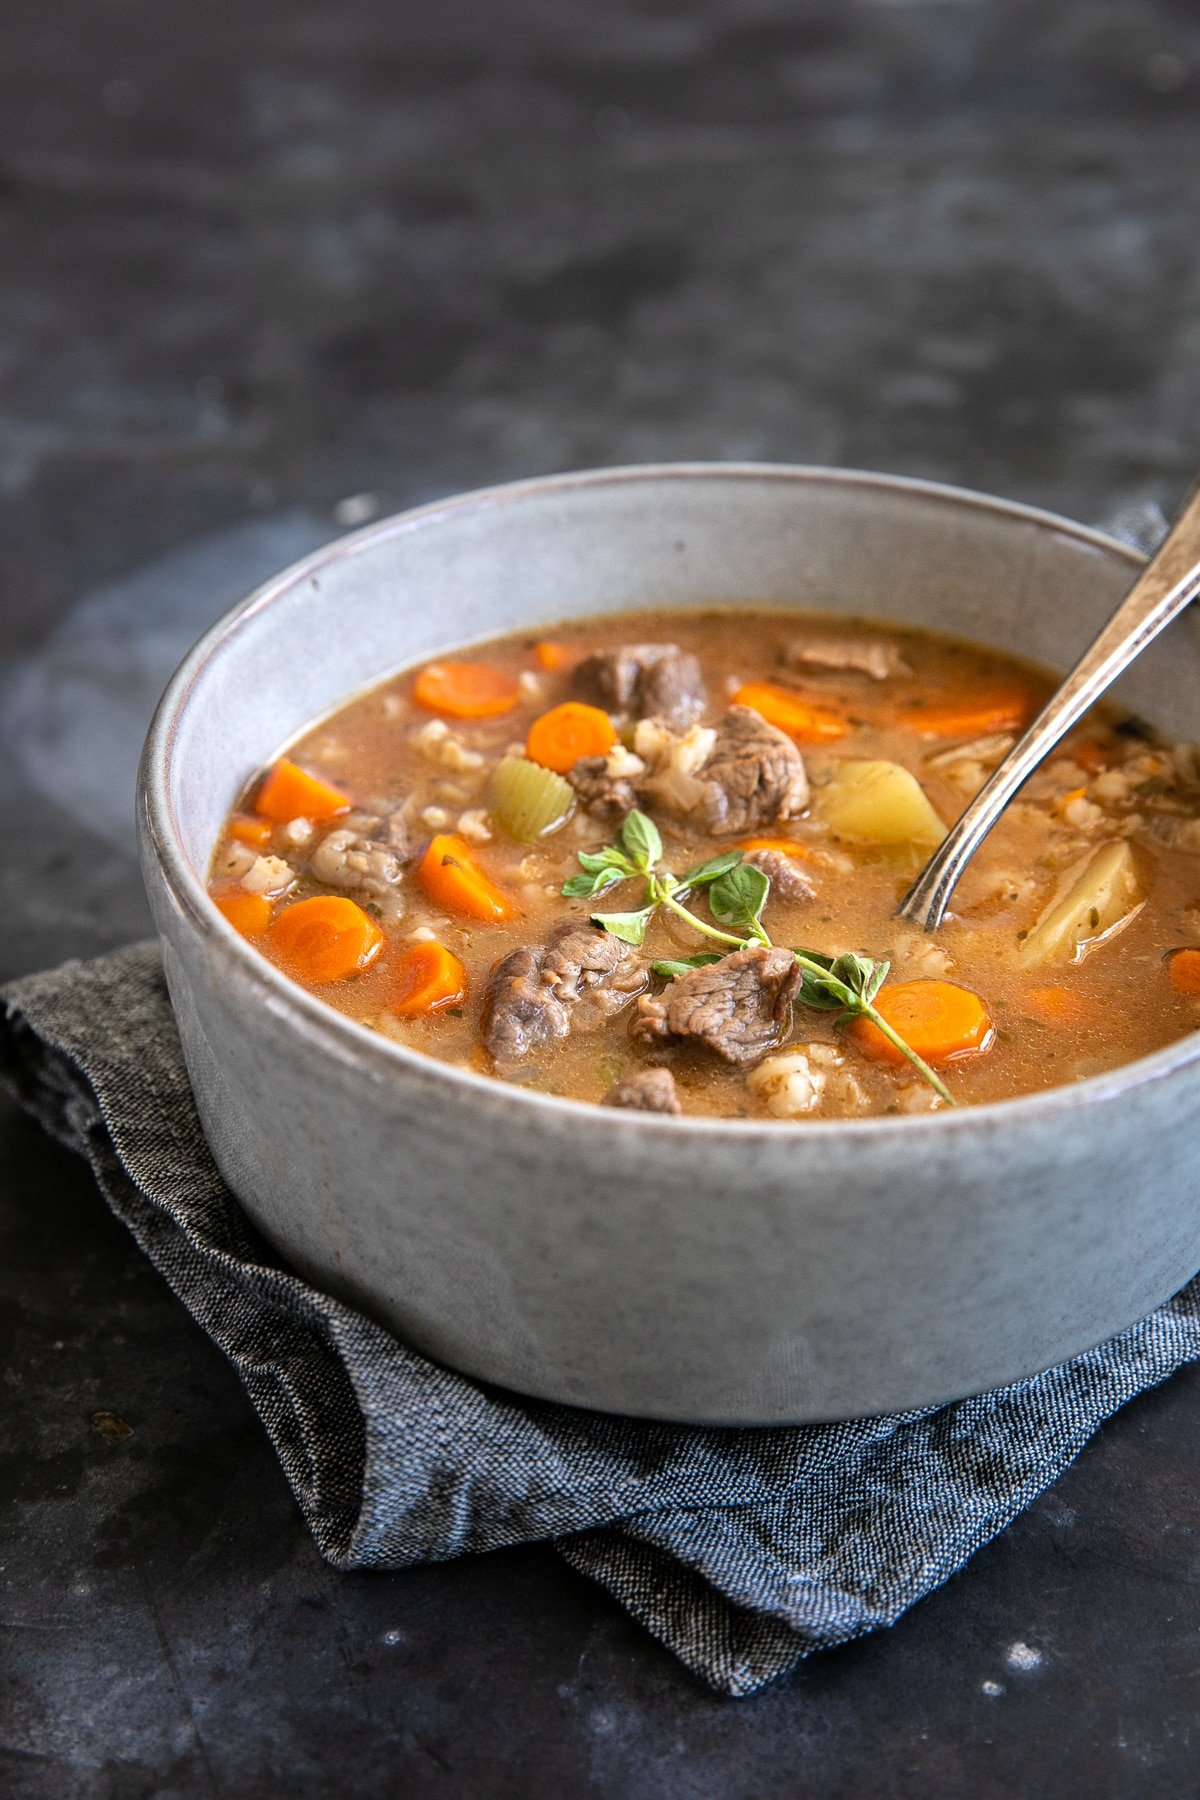 Large bowl filled with beef barley soup made with chunks of beef, carrots, potatoes, and barley in a beef and tomato broth.